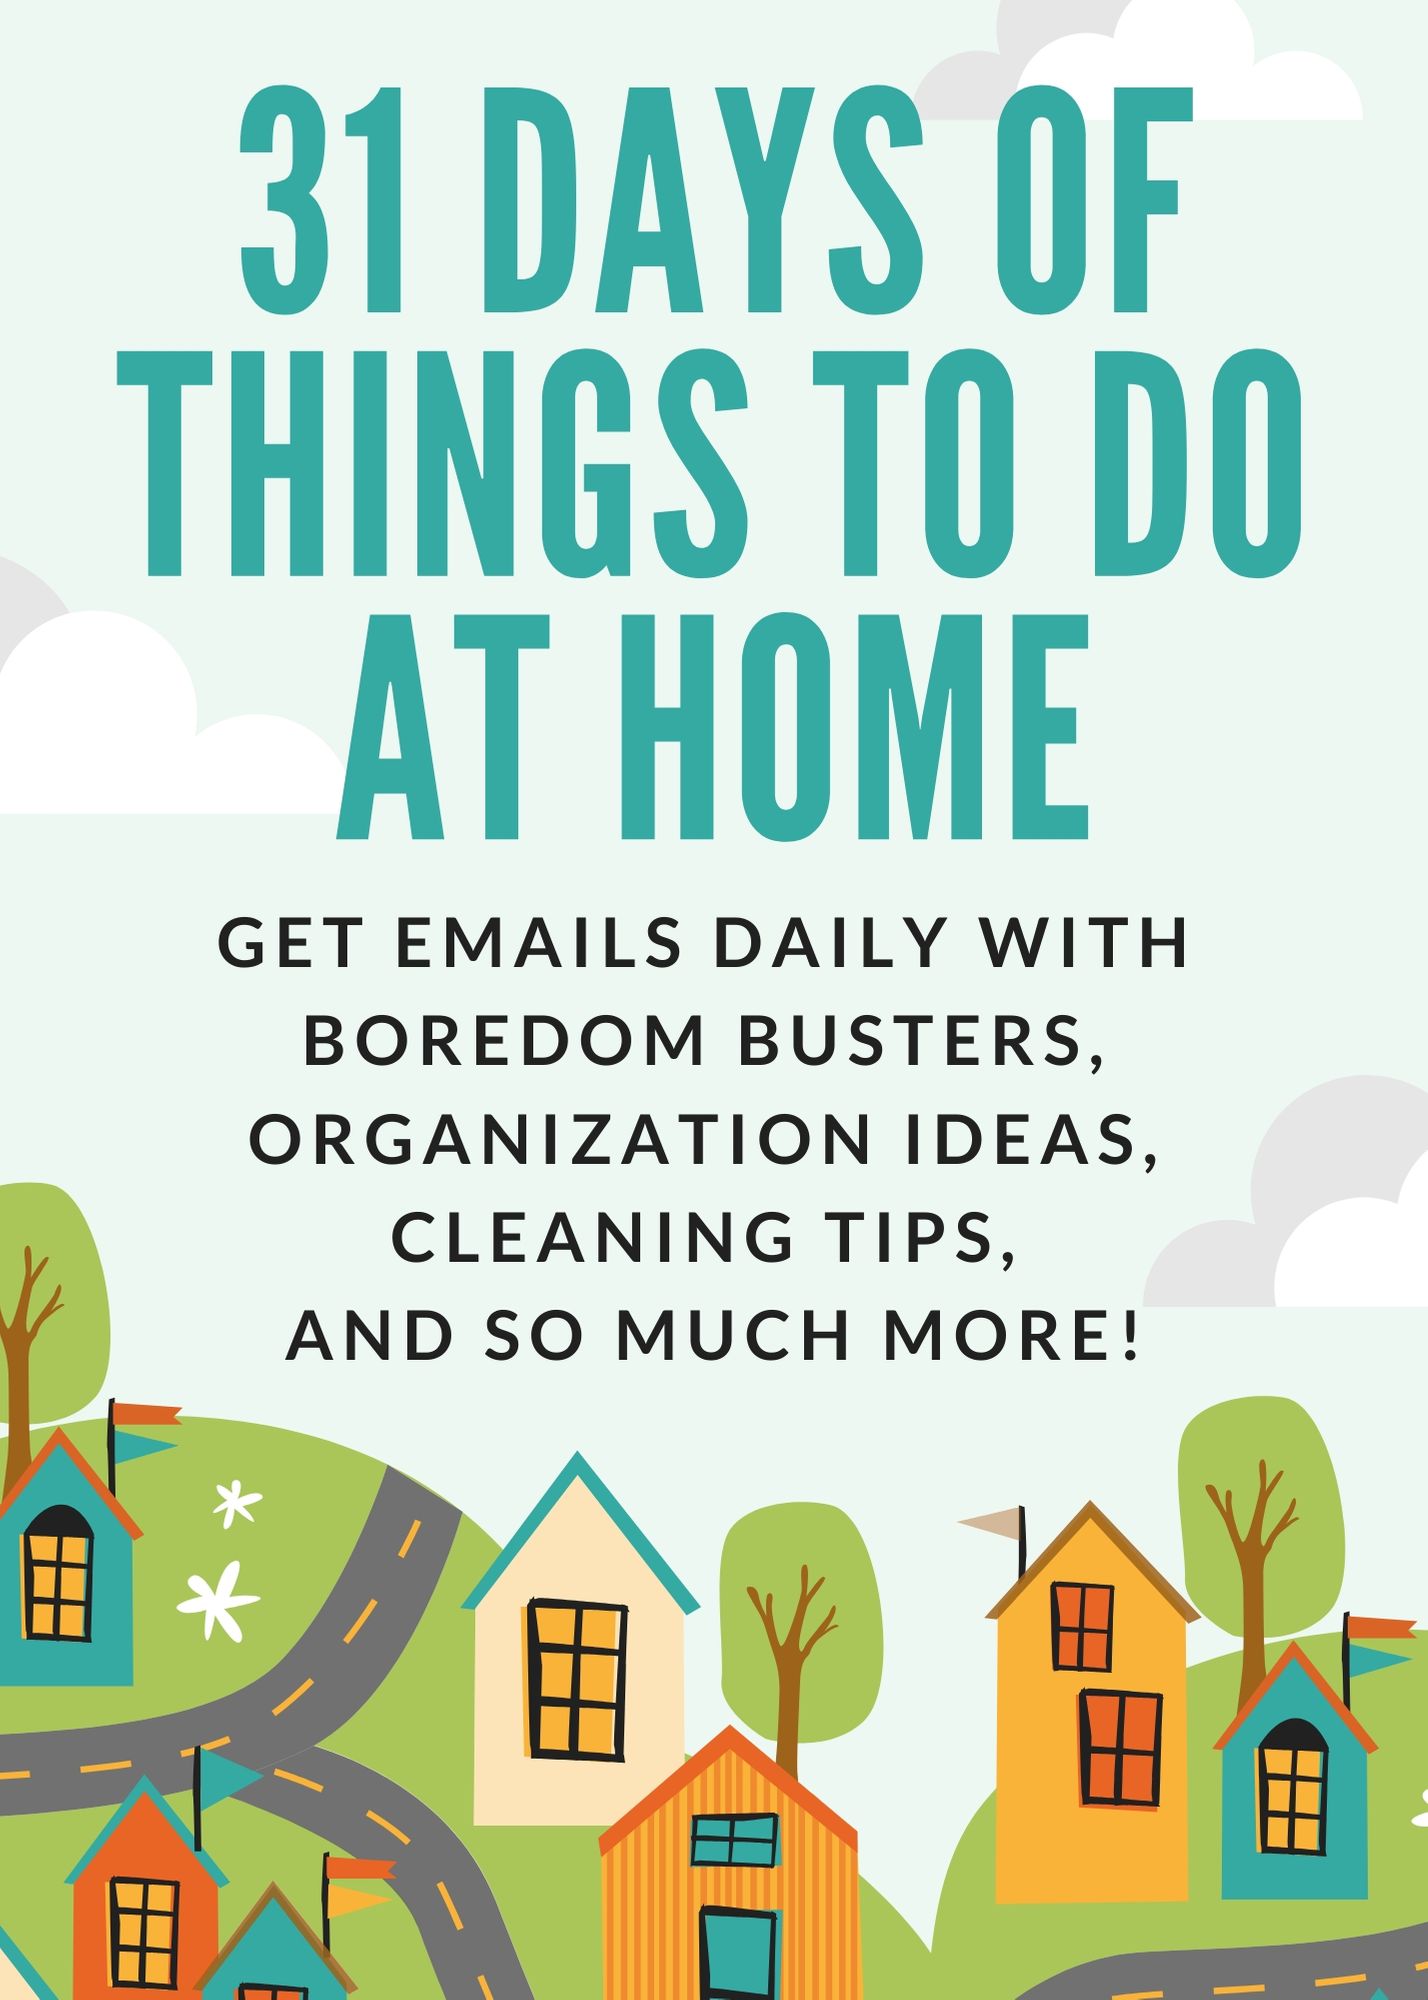 31 days of things to do at home